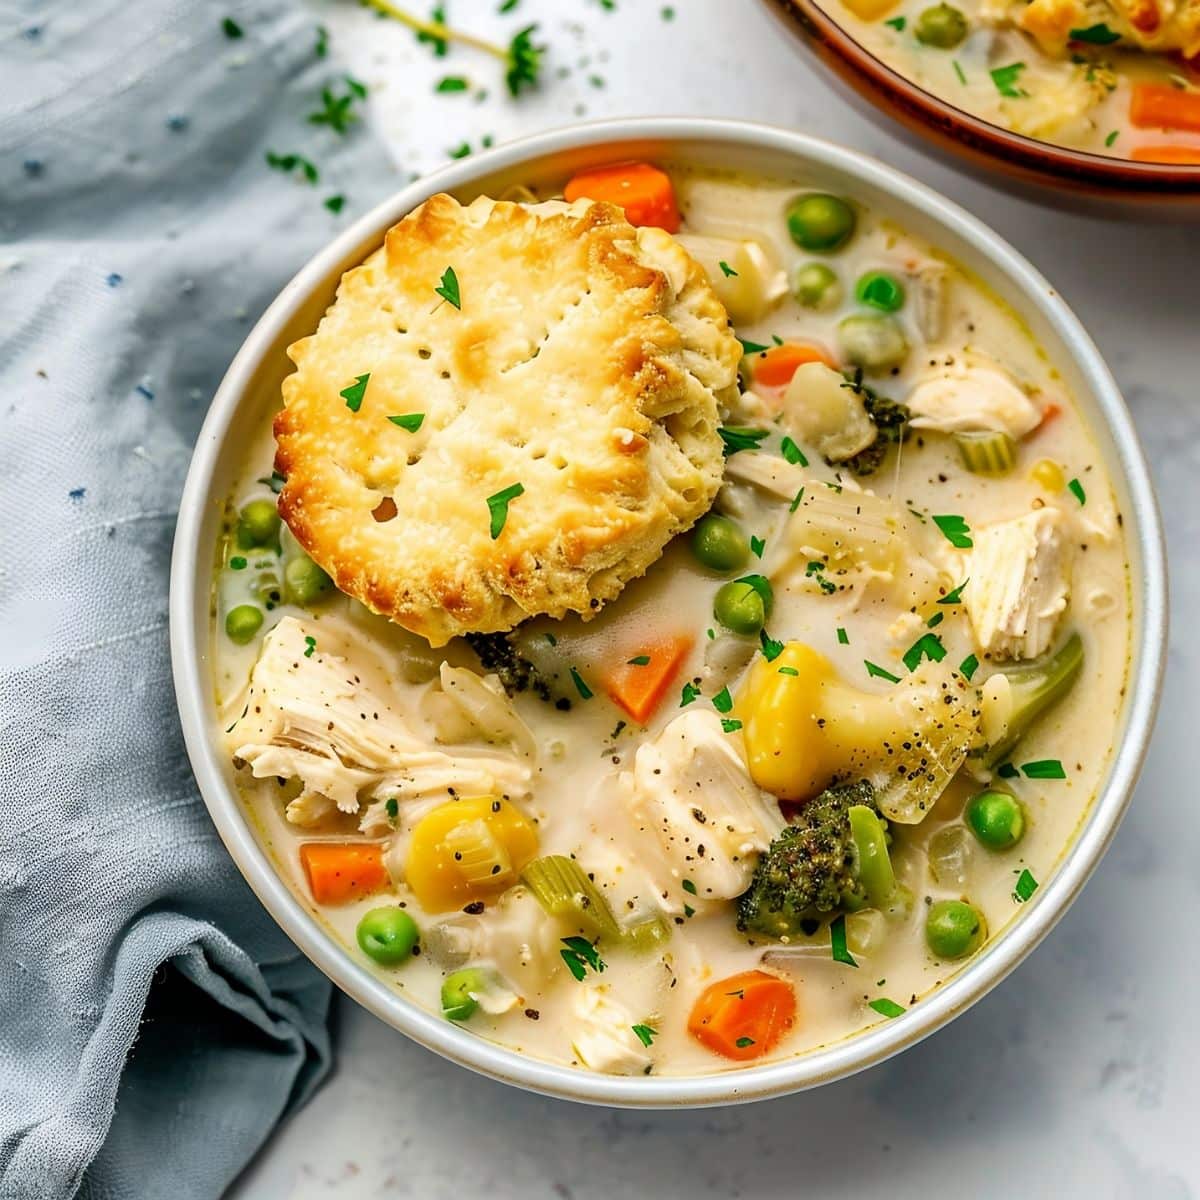 Top View of Two Bowls of Chicken Pot Pie Soup with a Biscuit on Top